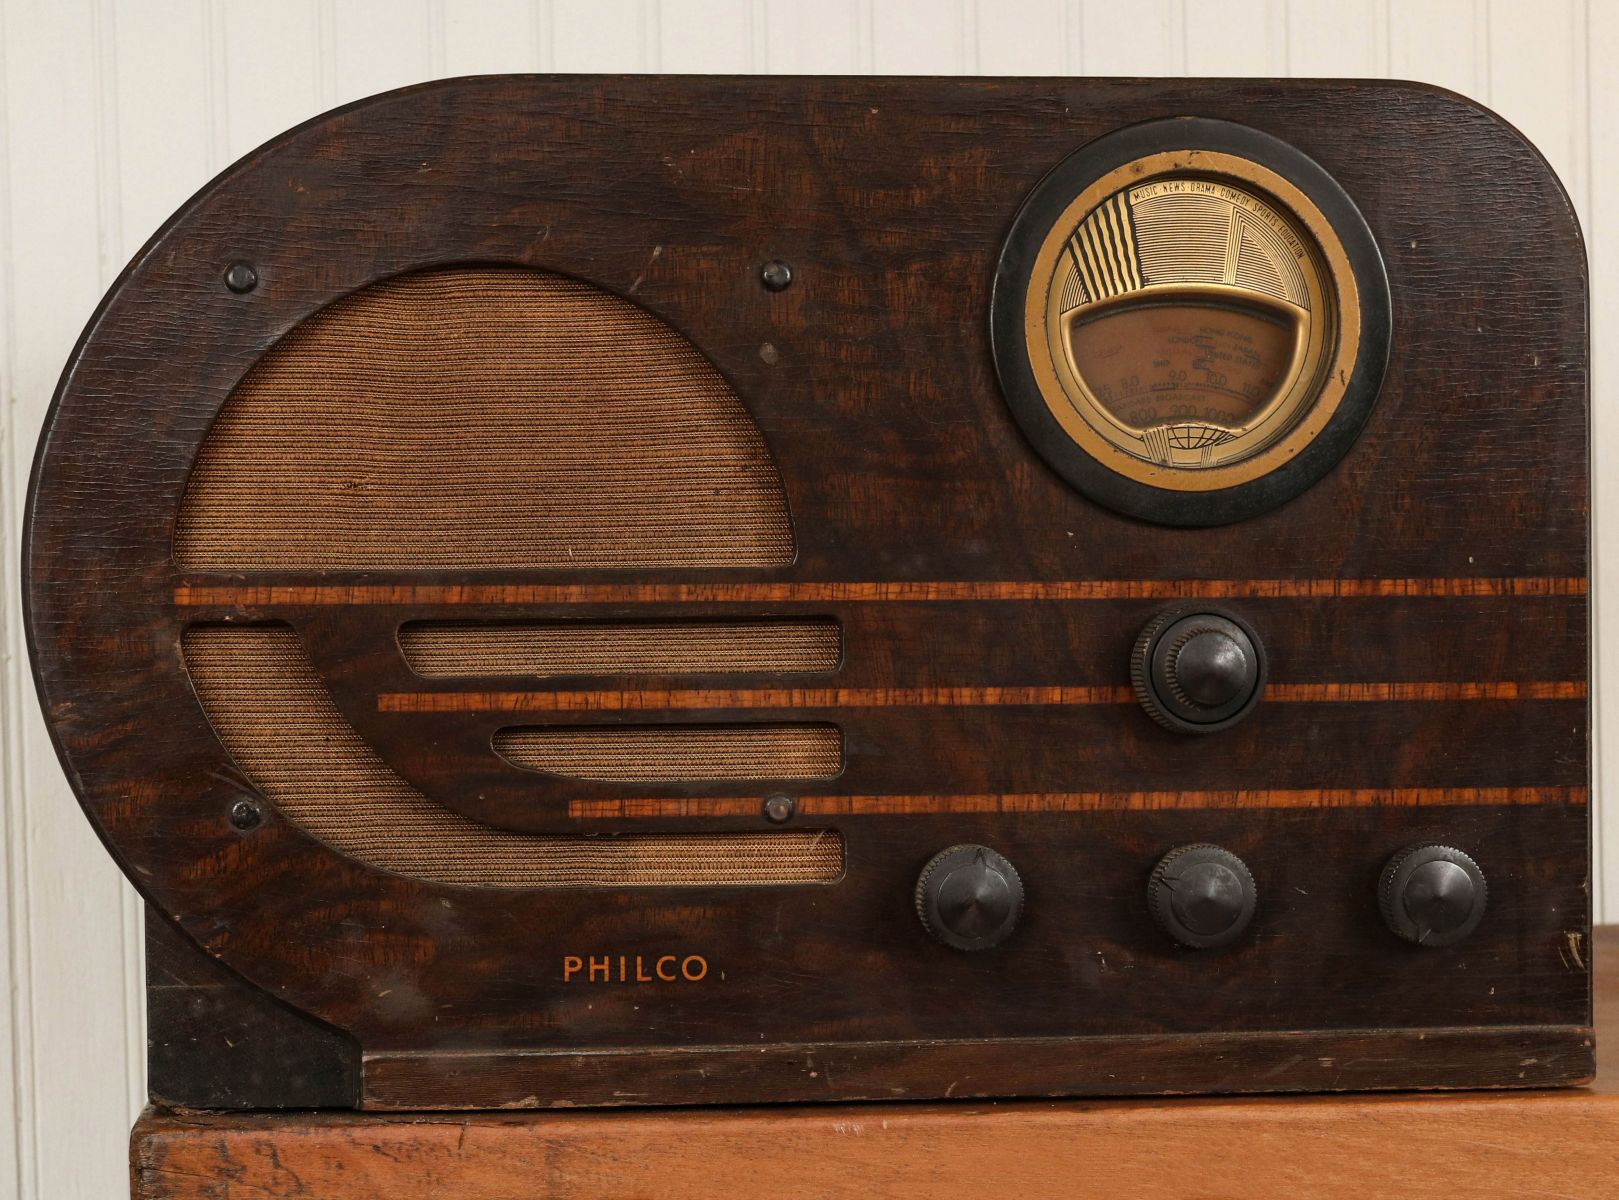 A 1930s WOOD CASE TABLE TOP RADIO